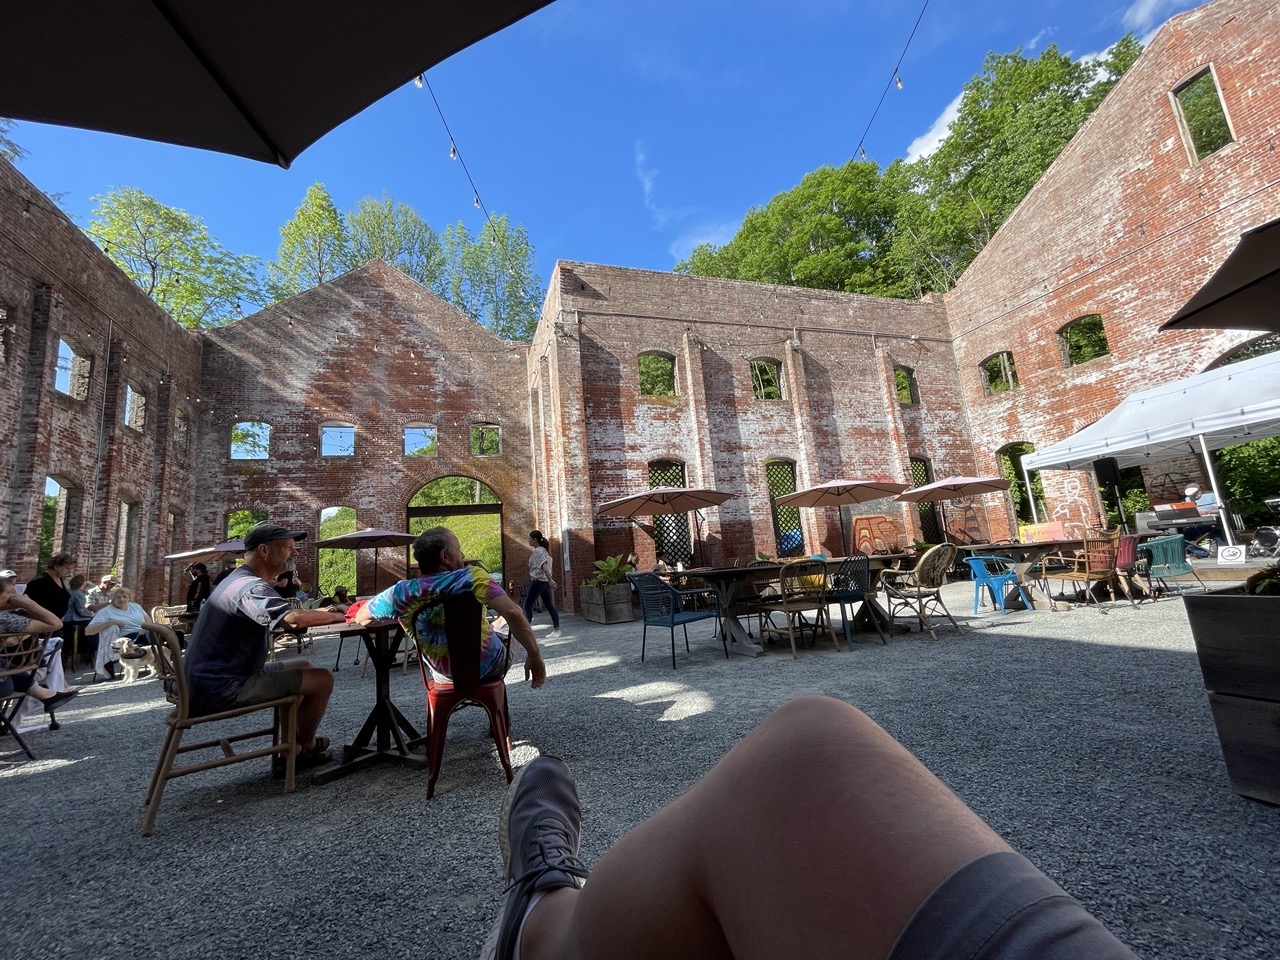 My point of view while sitting inside a hollowed out building turned into a space to eat, drink and listen to music. Blue skies, brick walls, people sitting at tables under umbrellas.